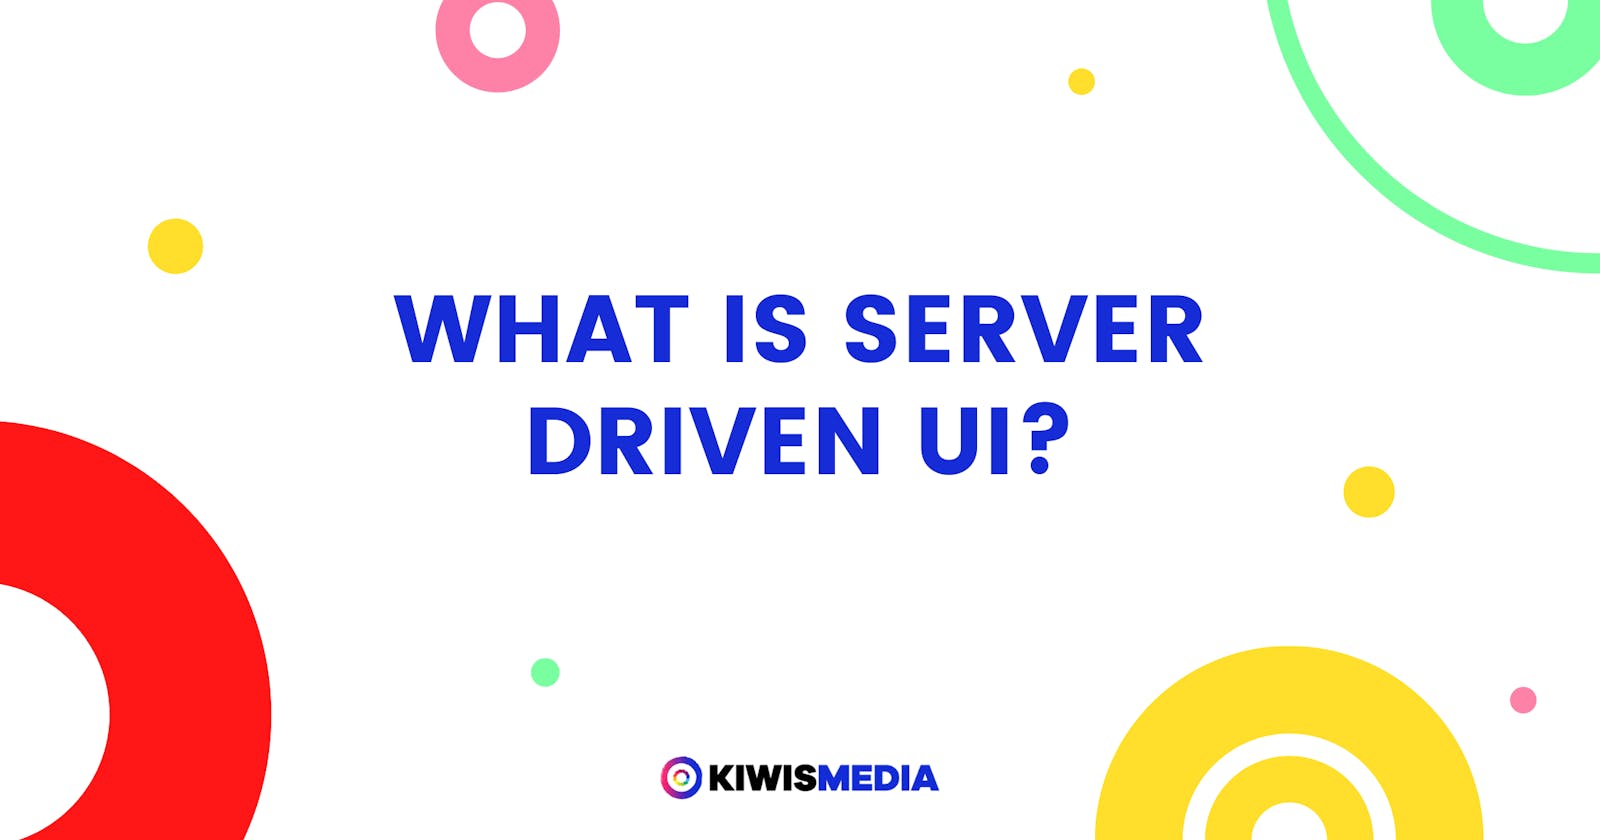 What is Server Driven UI?